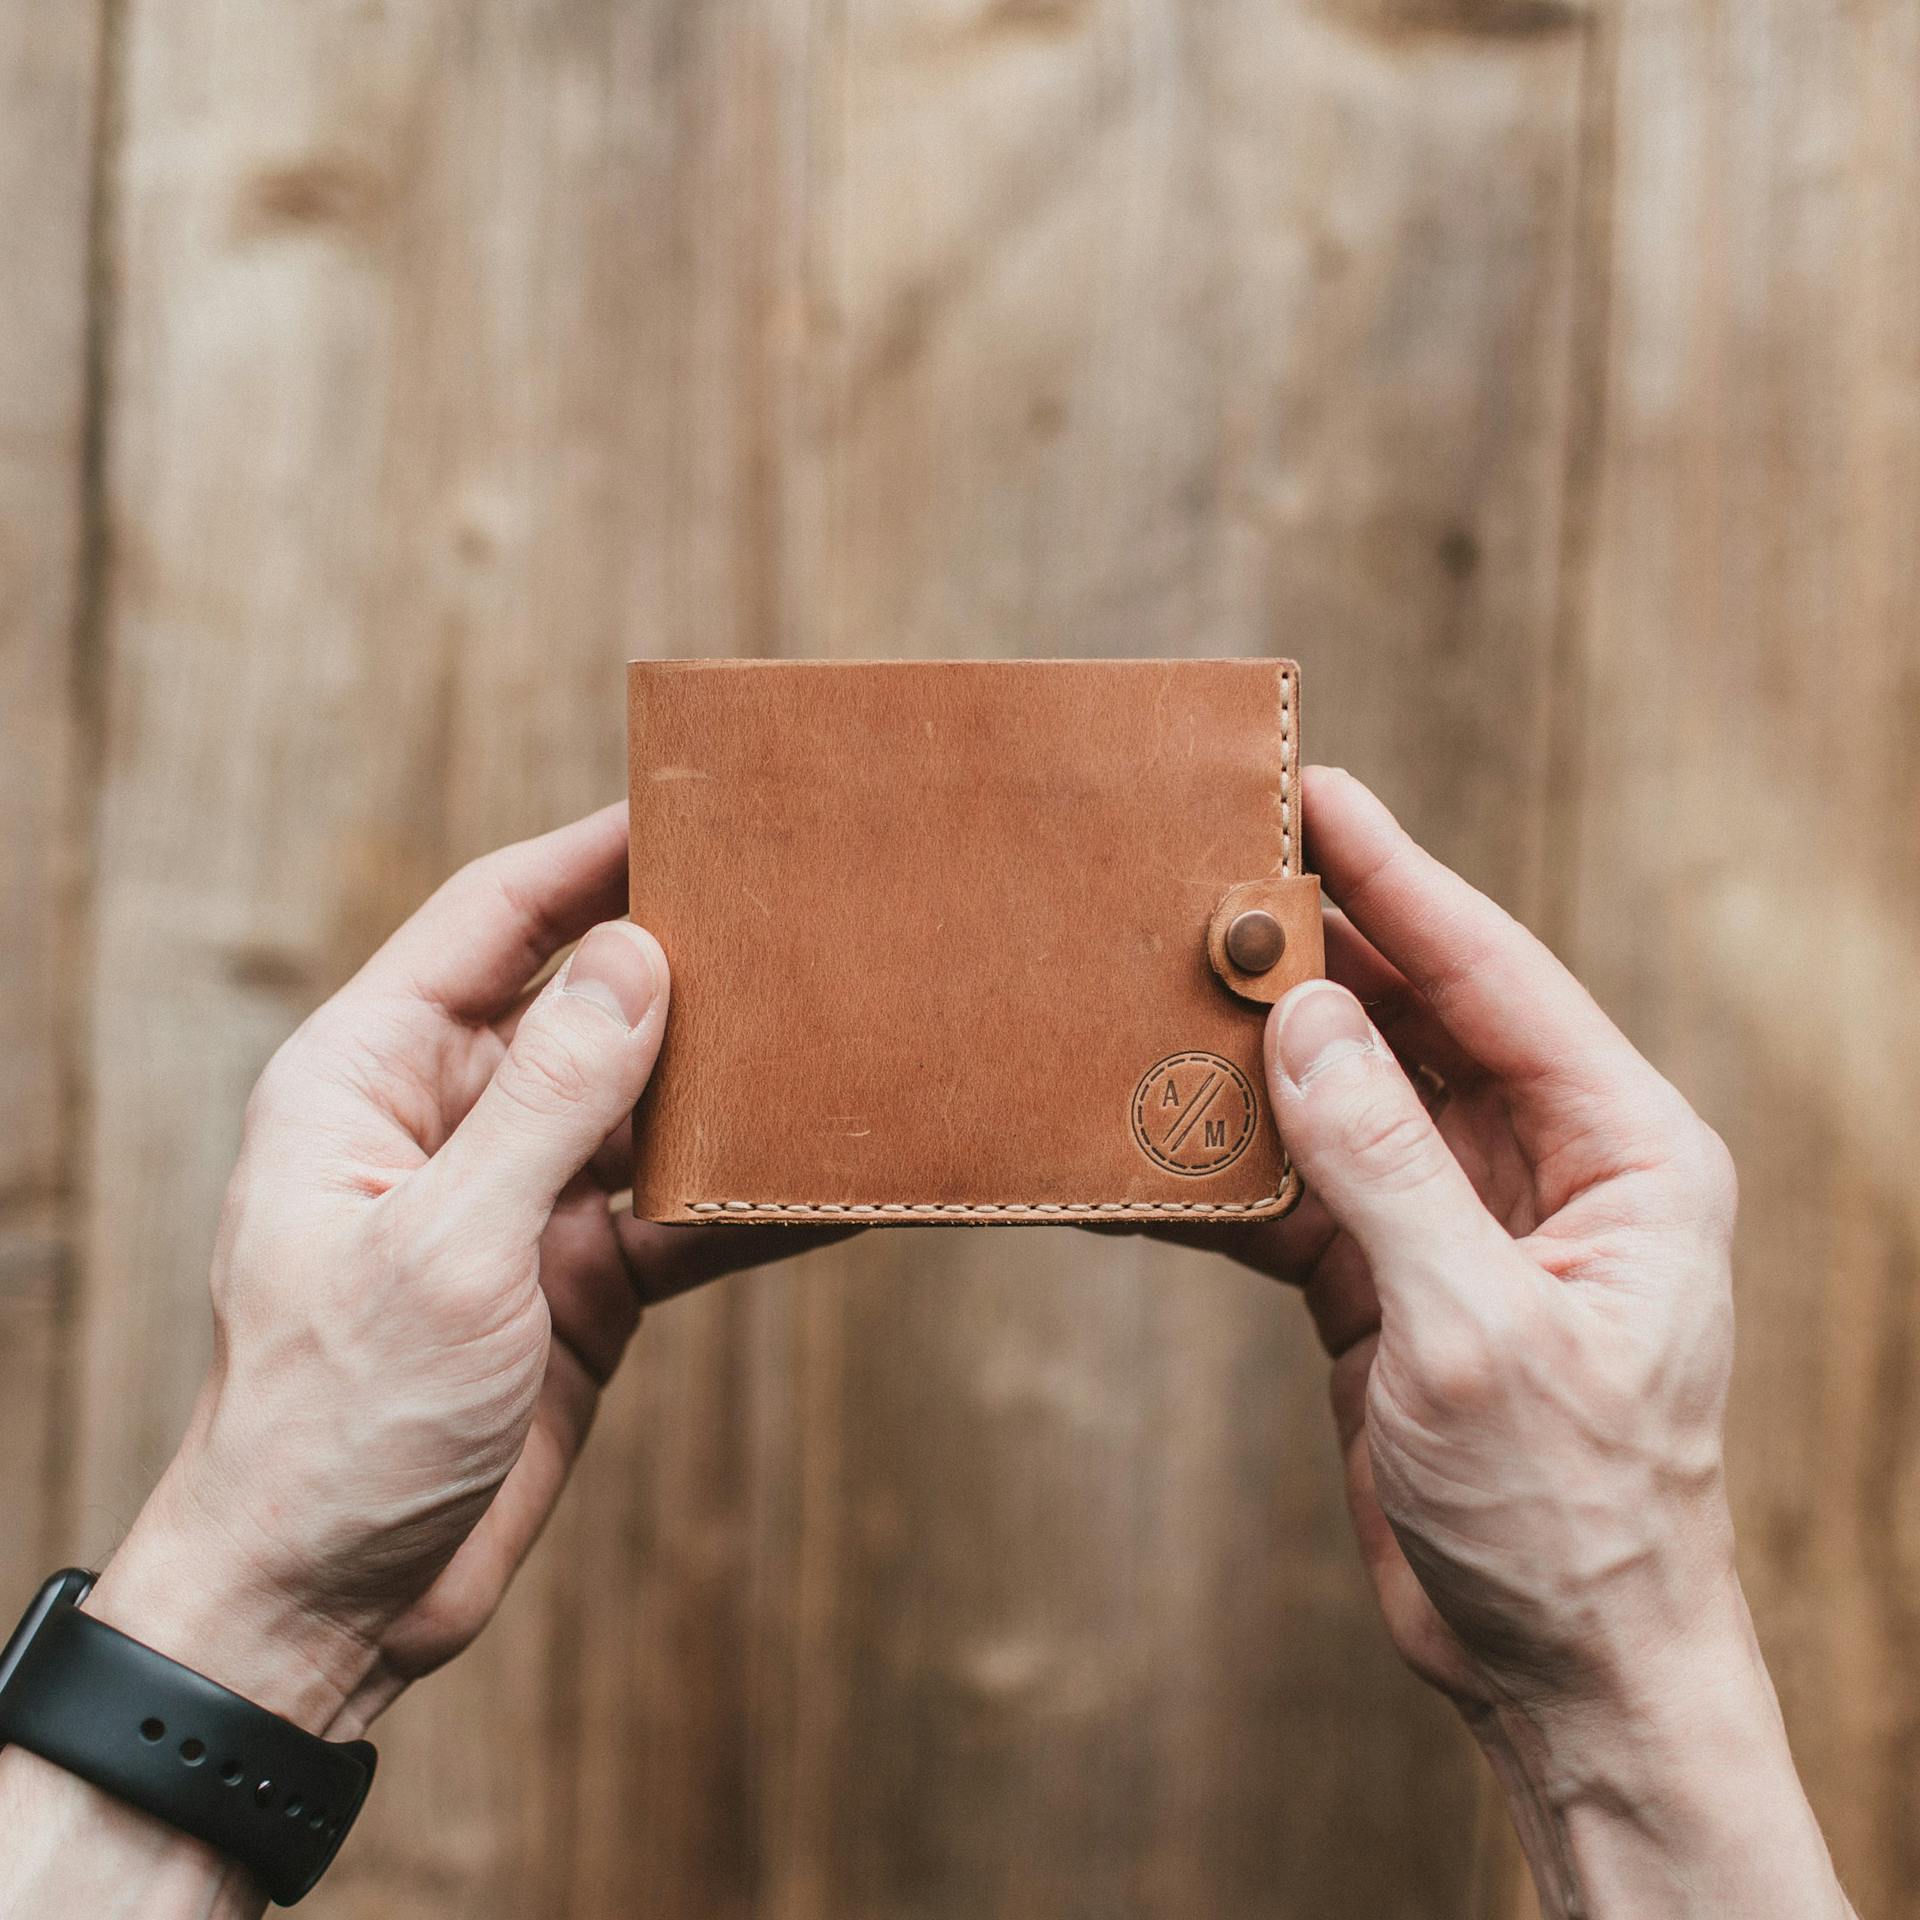 A man holding a wallet | Source: Pexels